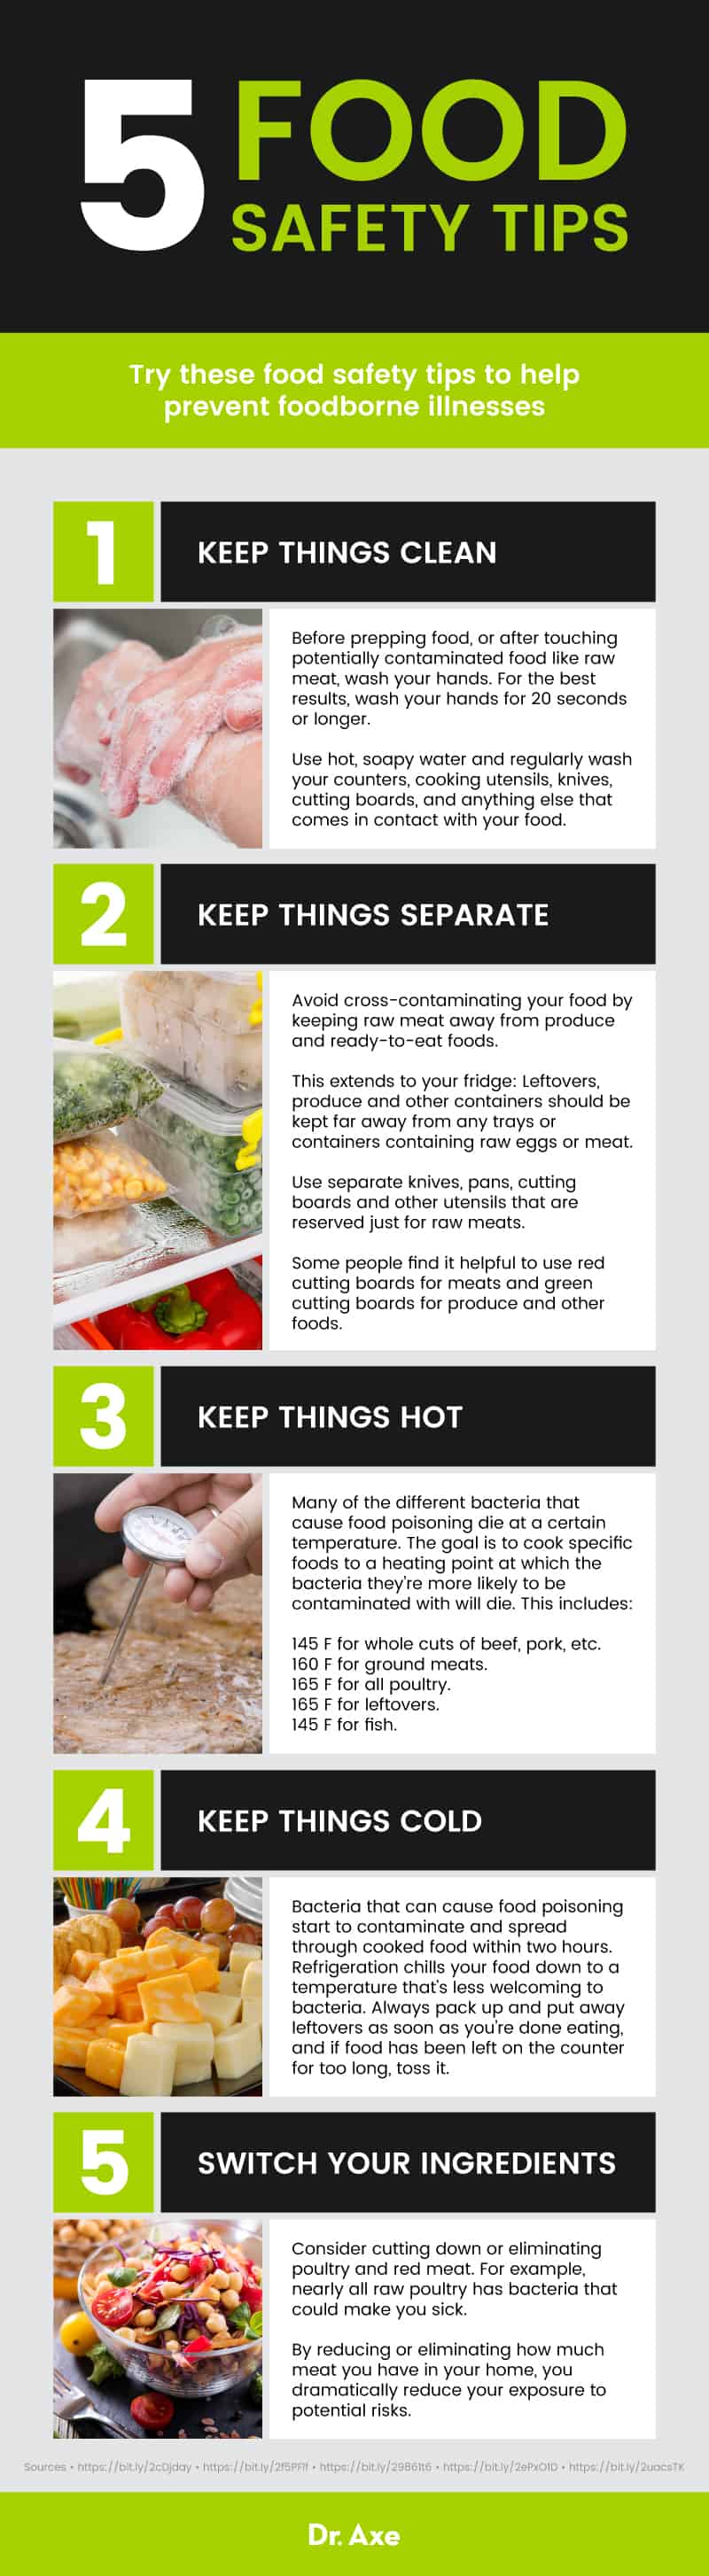 Signs of food poisoning: 5 food safety tips - Dr. Axe